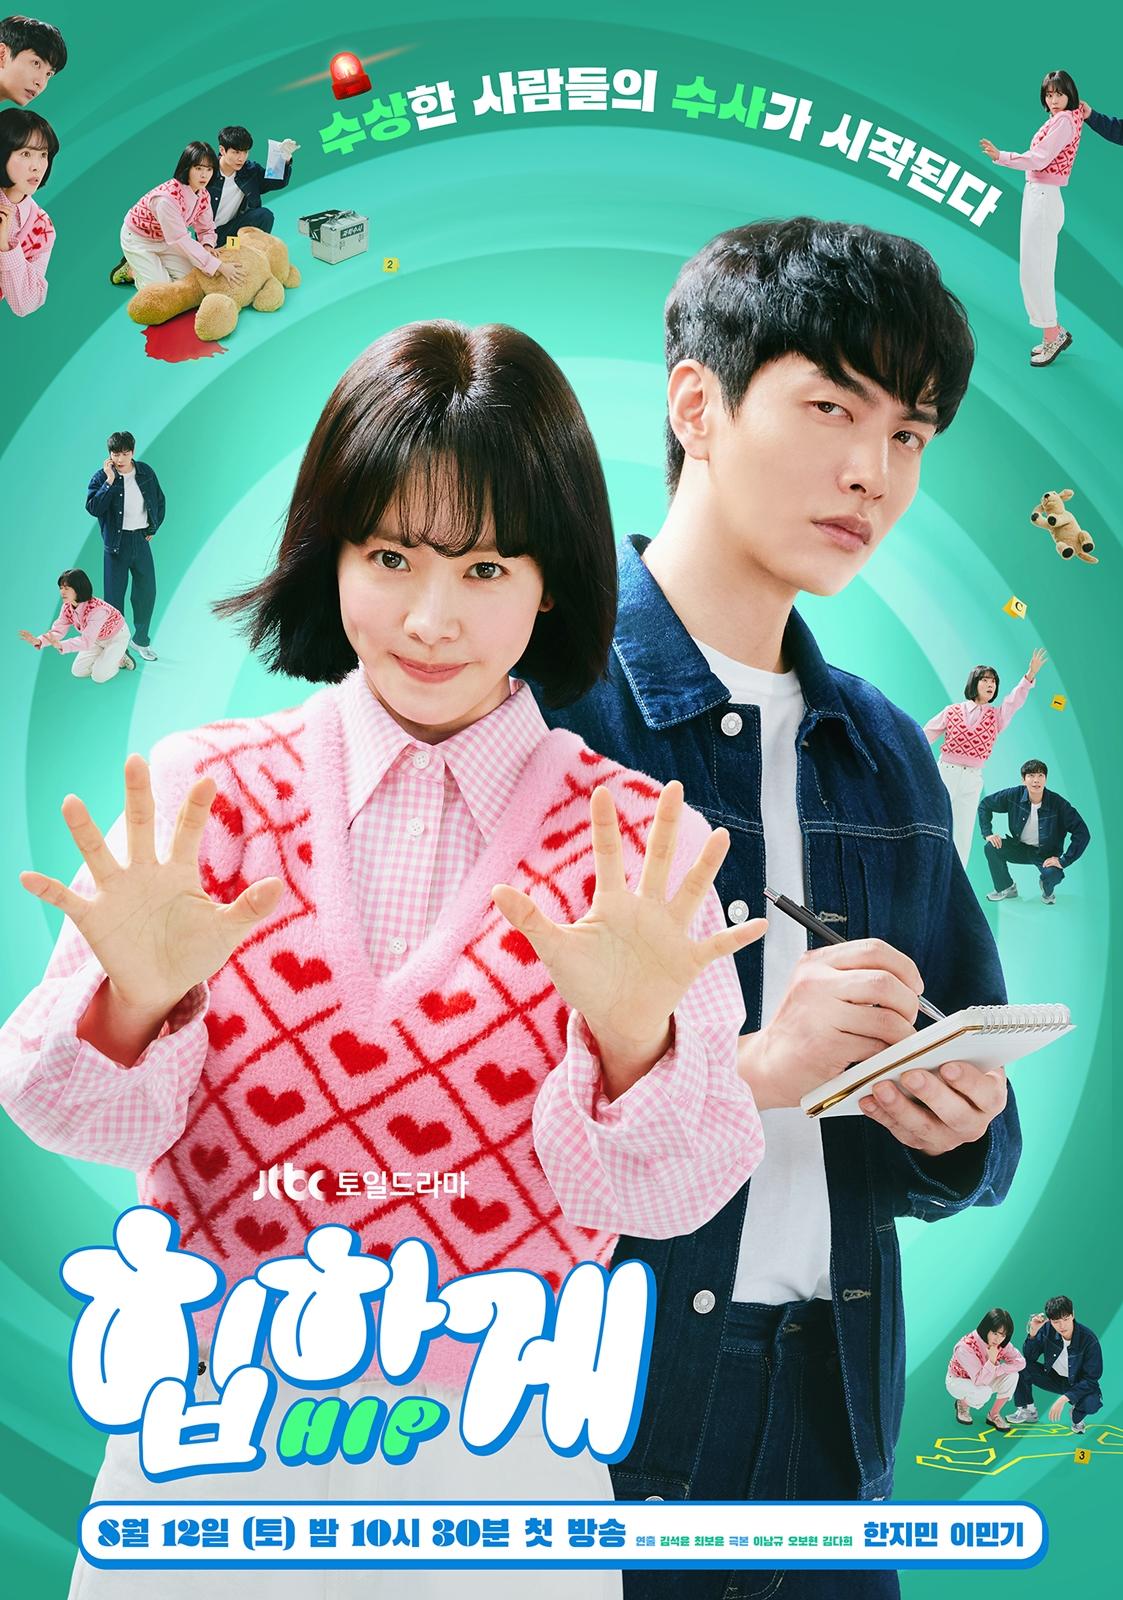 Behind Your Touch (Netflix): Set in the tranquil village of Mujin, Behind Your Touch follows a veterinarian with psychic abilities, Bong Ye-Boon, and Detective Moon Jang-Yeol as they collaborate to solve small-time cases.